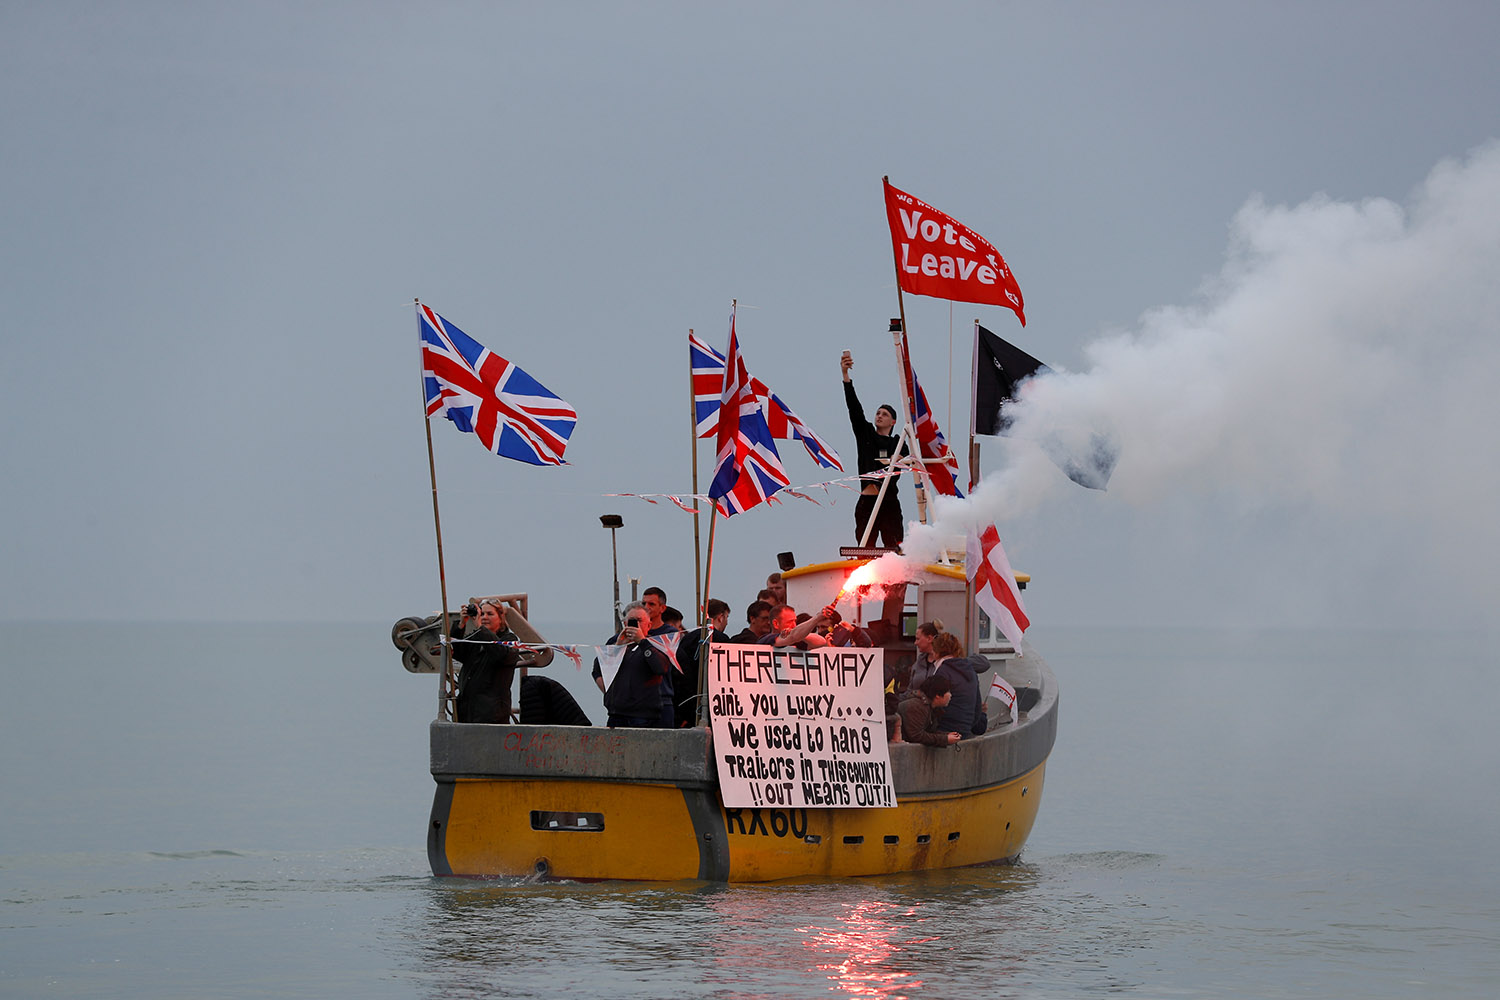 British fishermen stage a "Fishing for Leave" protest against Prime Minister Theresa May’s Brexit transition deal, in Hastings, England, April 8, 2018. REUTERS/Peter Nicholls/File Photo